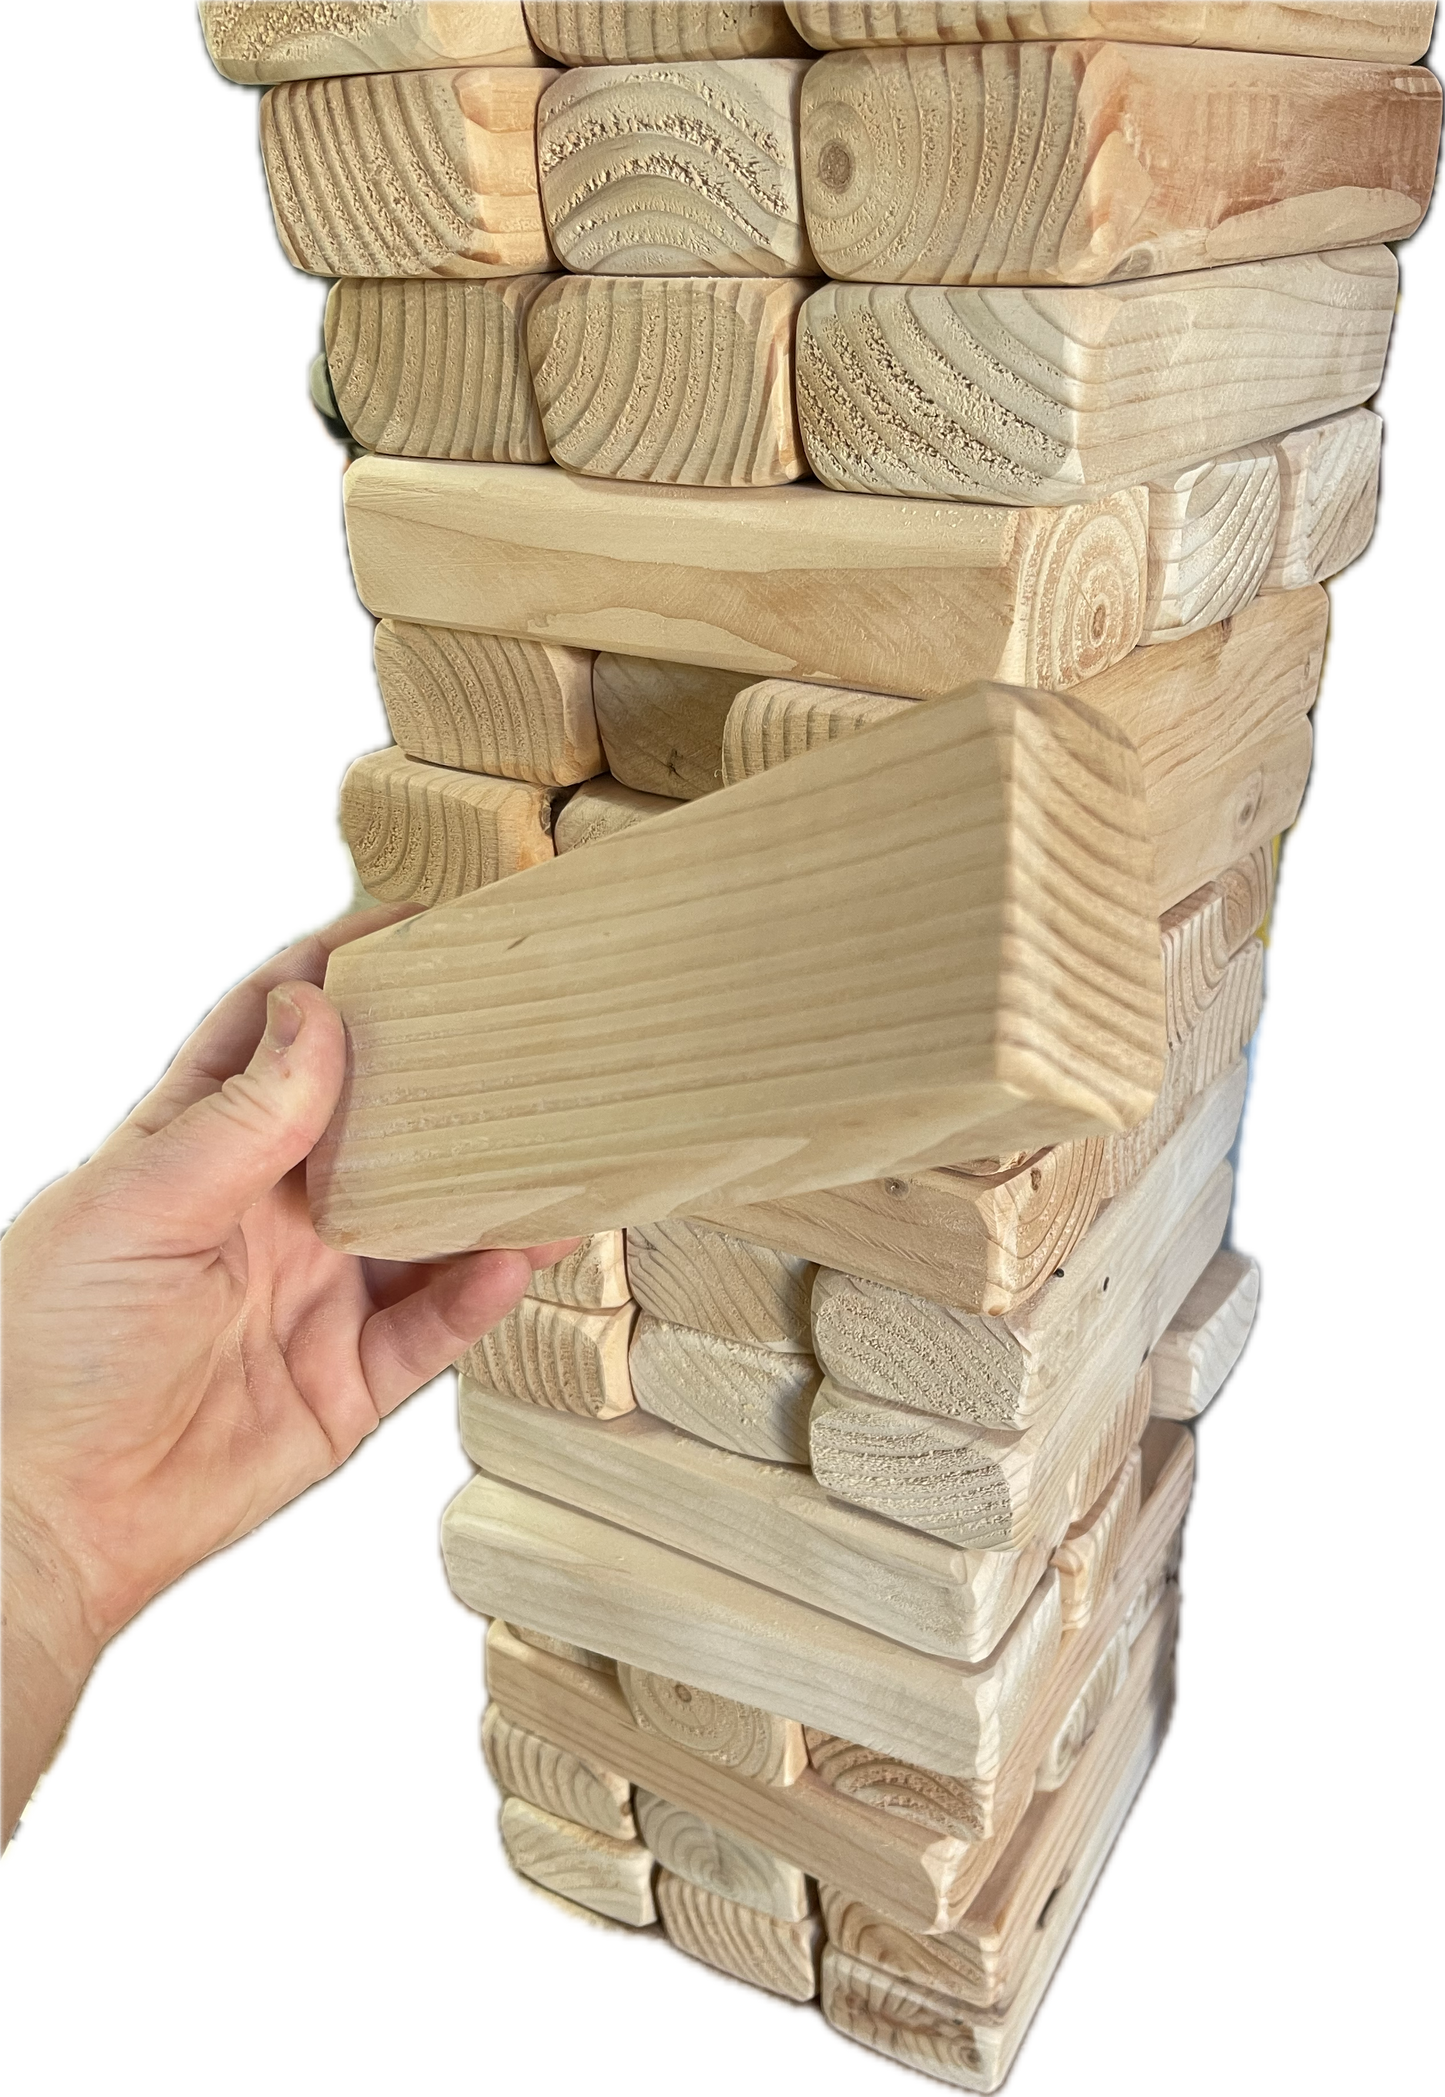 GIANT TUMBLE TOWER GAME 54 NATURAL WOOD + CARRYING CASE